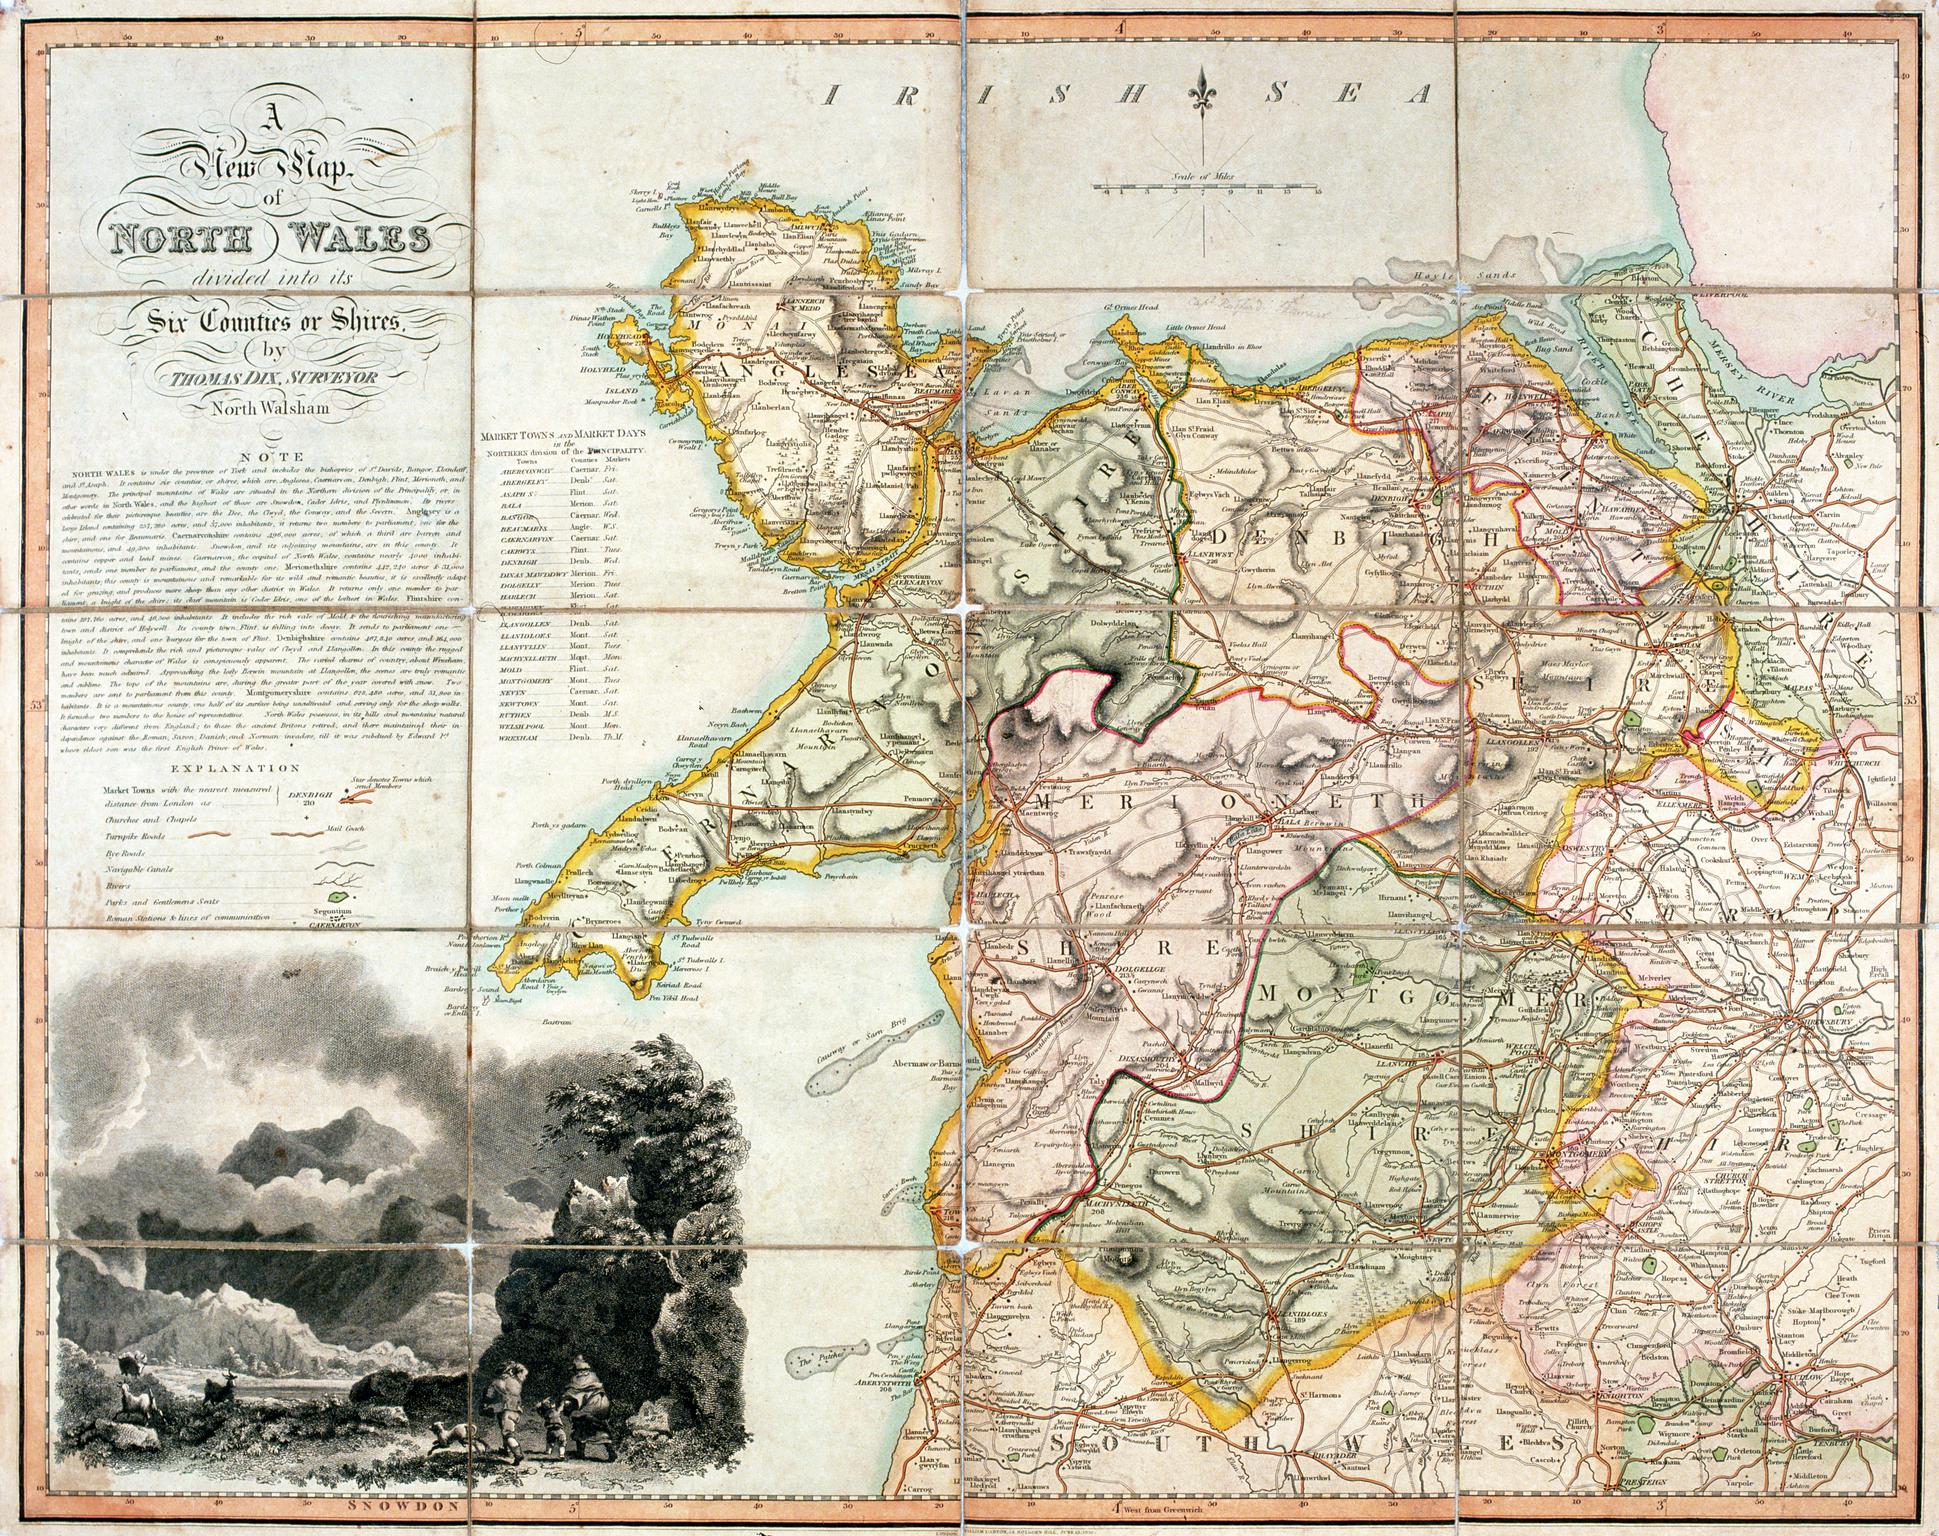 A new map of North Wales divided into its Six Counties or Shires (map)